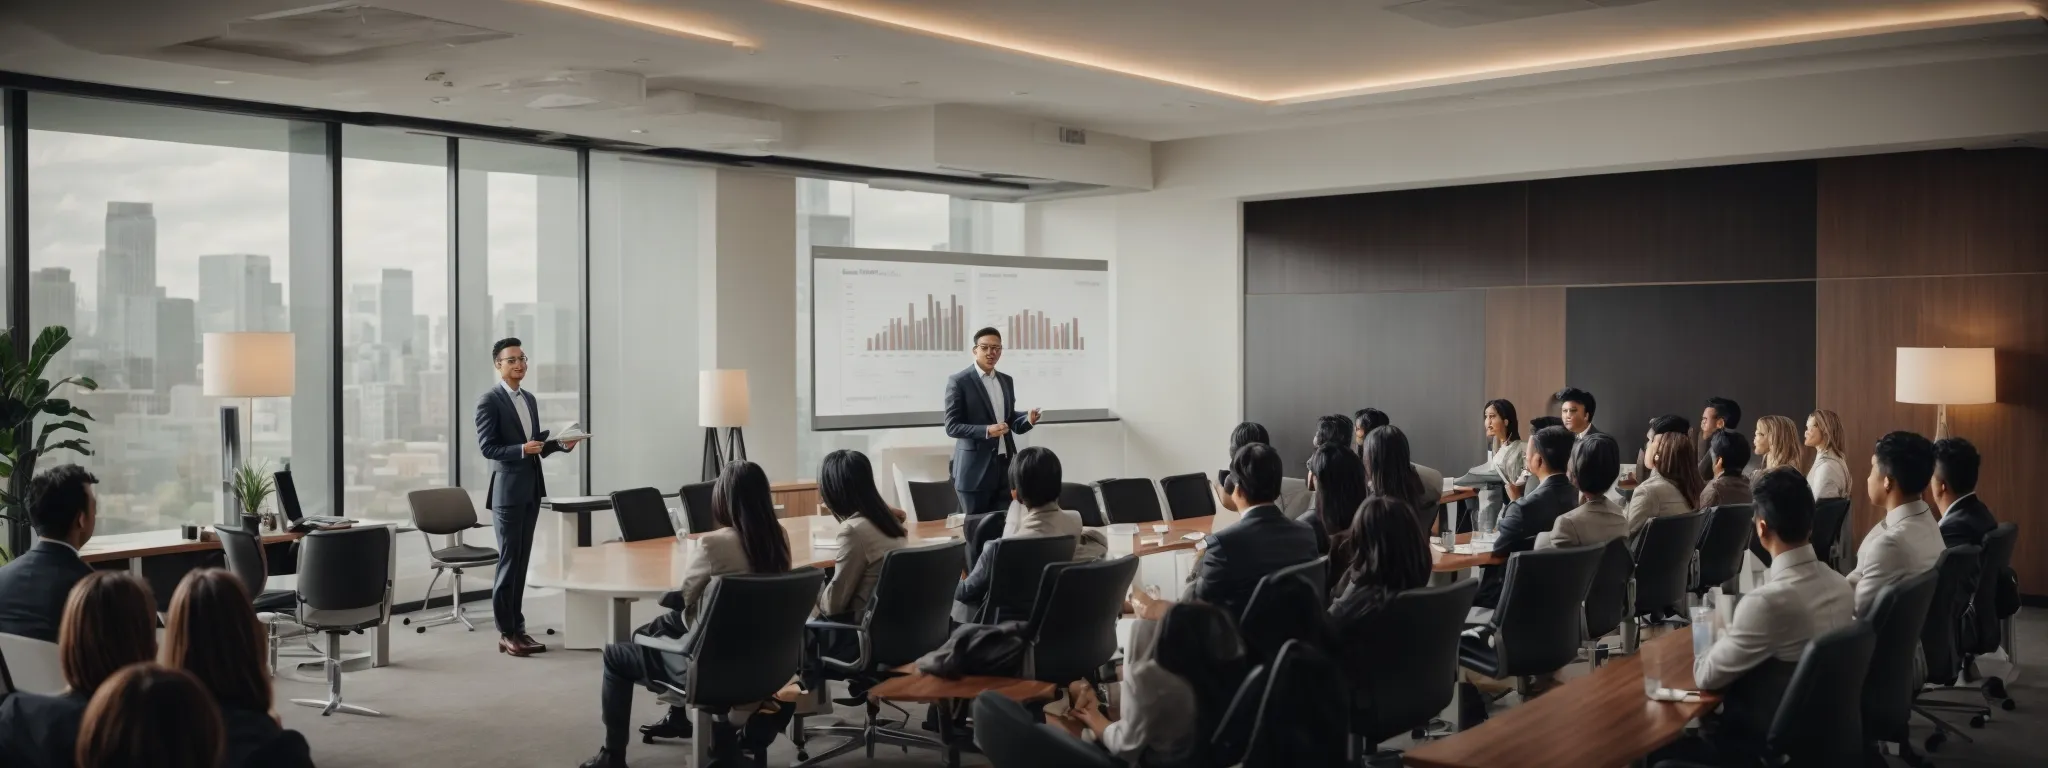 a professional giving an engaging presentation to a diverse group of businesspeople about digital marketing strategies in a modern conference room.